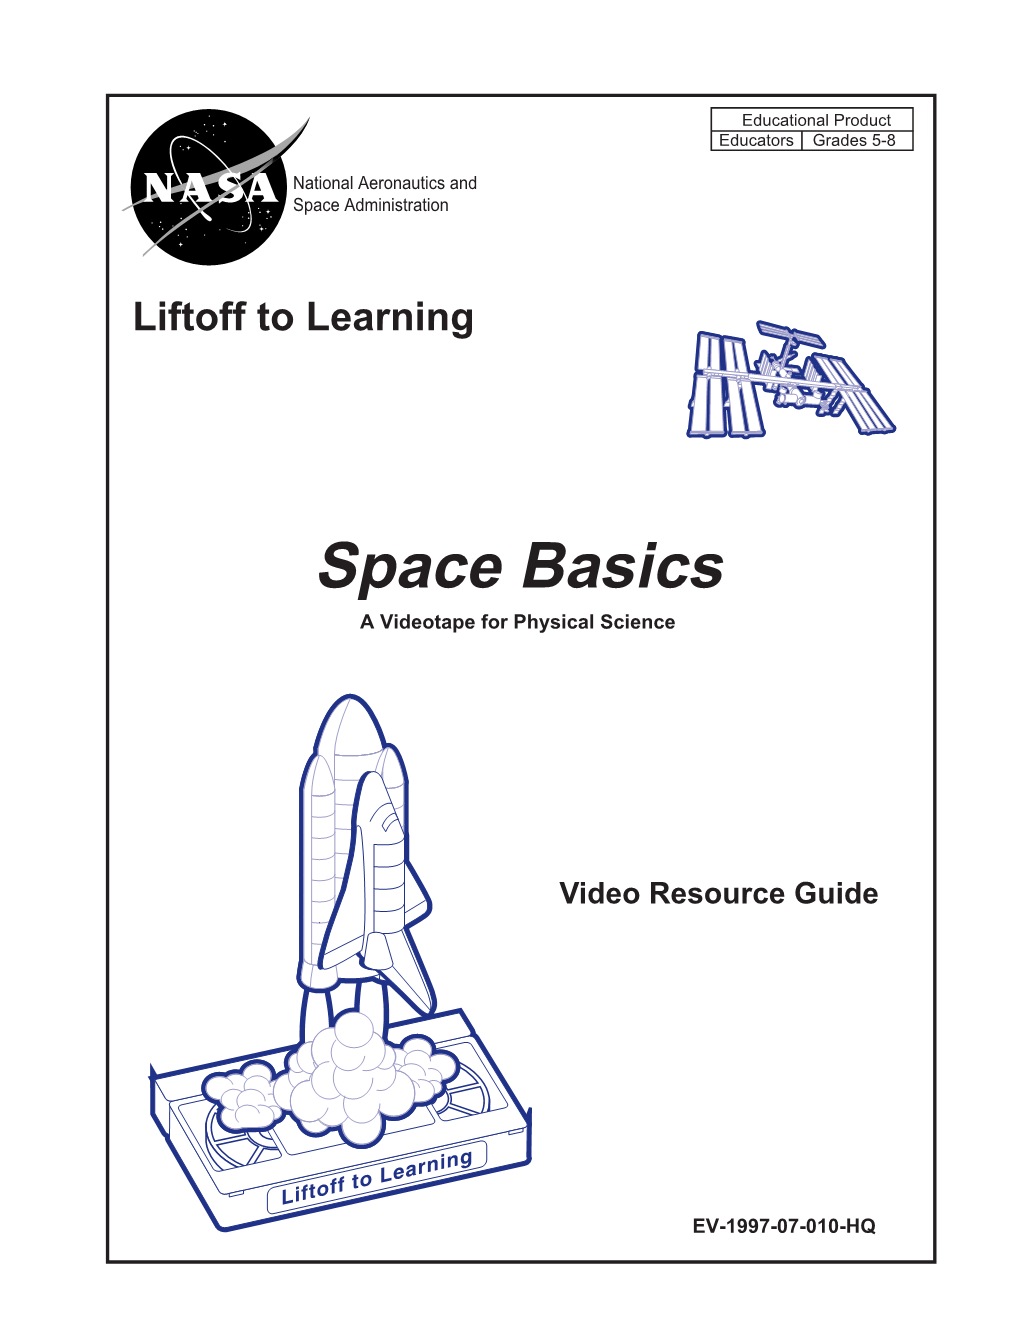 Space Basics a Videotape for Physical Science